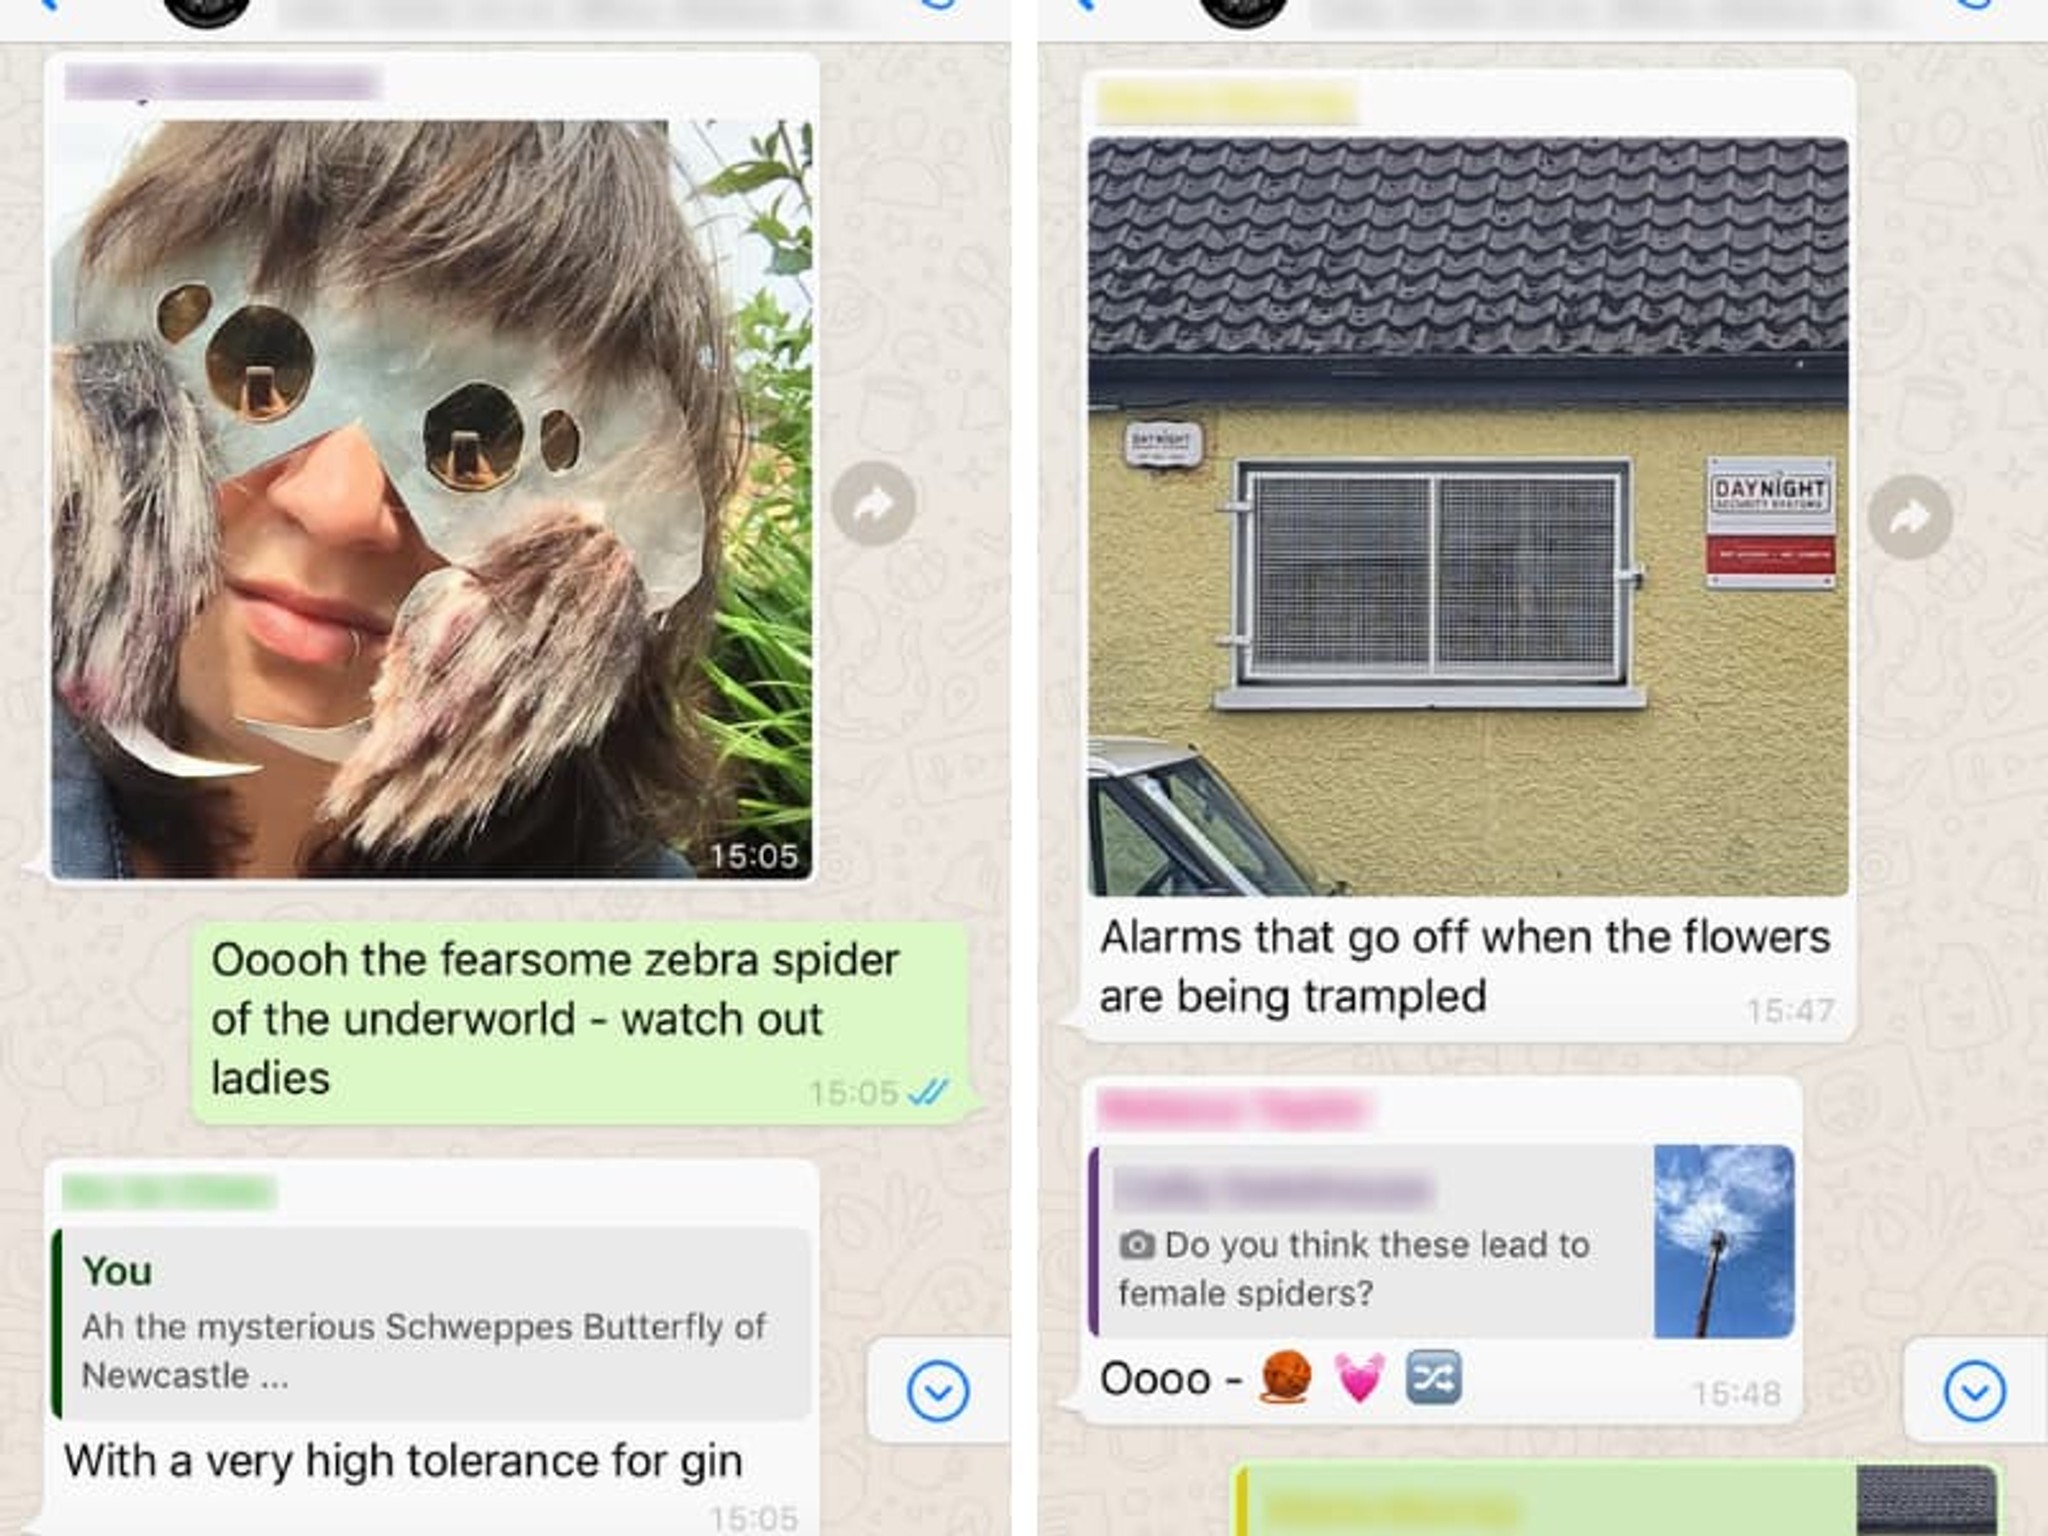 The jumping zebra spider (pictured left) looked for web structures within their neighbourhood data networks as a platform to search for a mate. The wildflower meadow (message pictured right) found an alarm on a local building and wanted to use this to alert people when they trampled on the flowers.